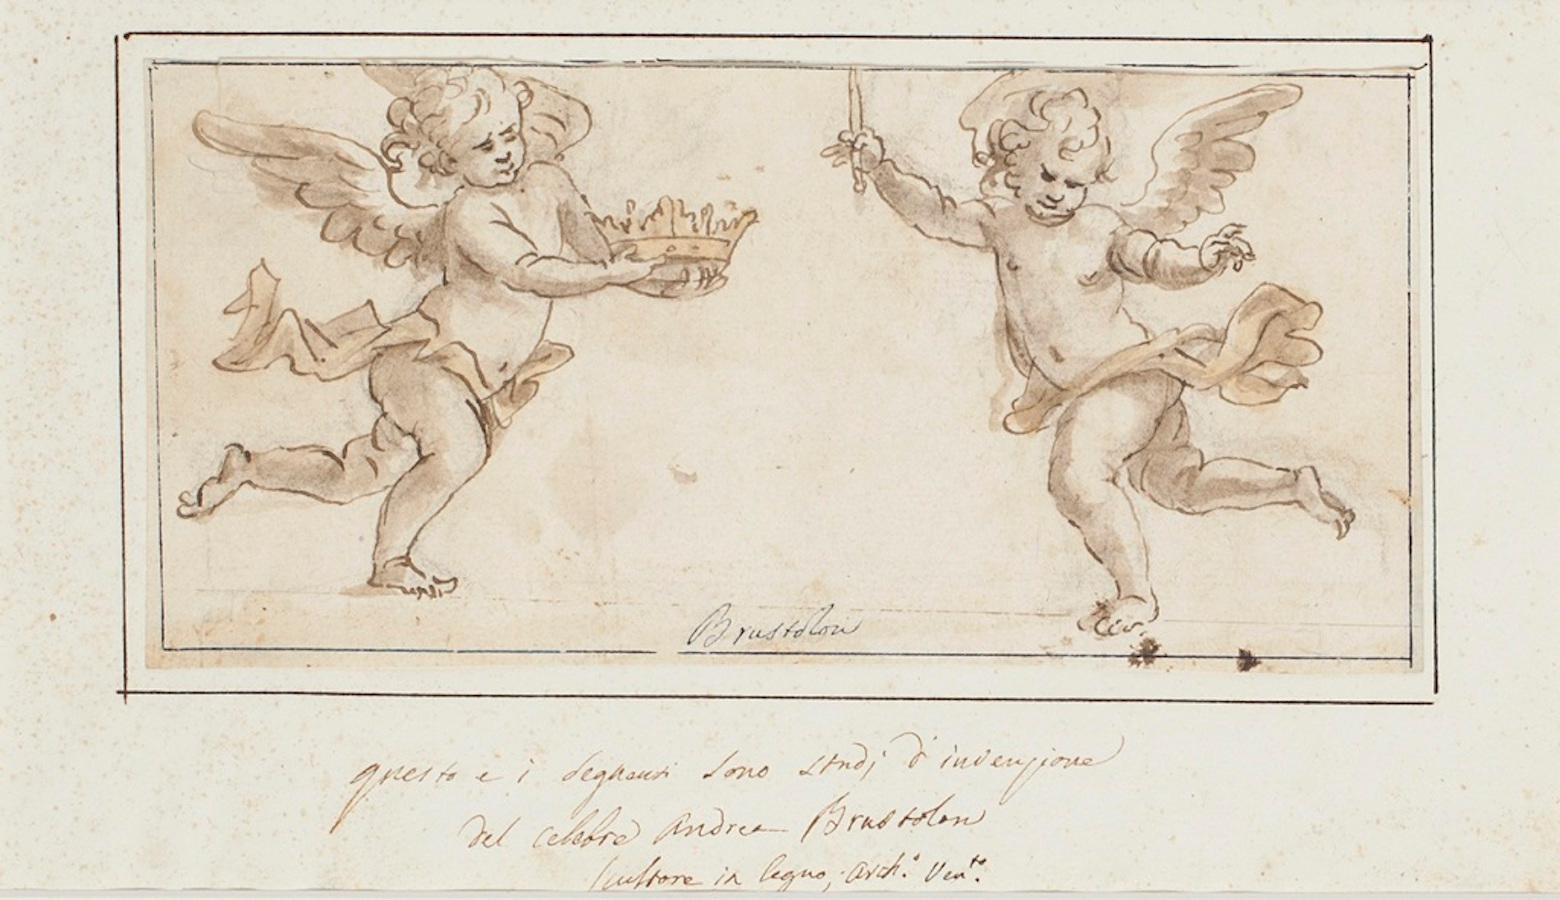 Andrea Brustolon Figurative Art - Two Angels - Ink and Watercolor Drawing by A. Brustolon - Early 1700